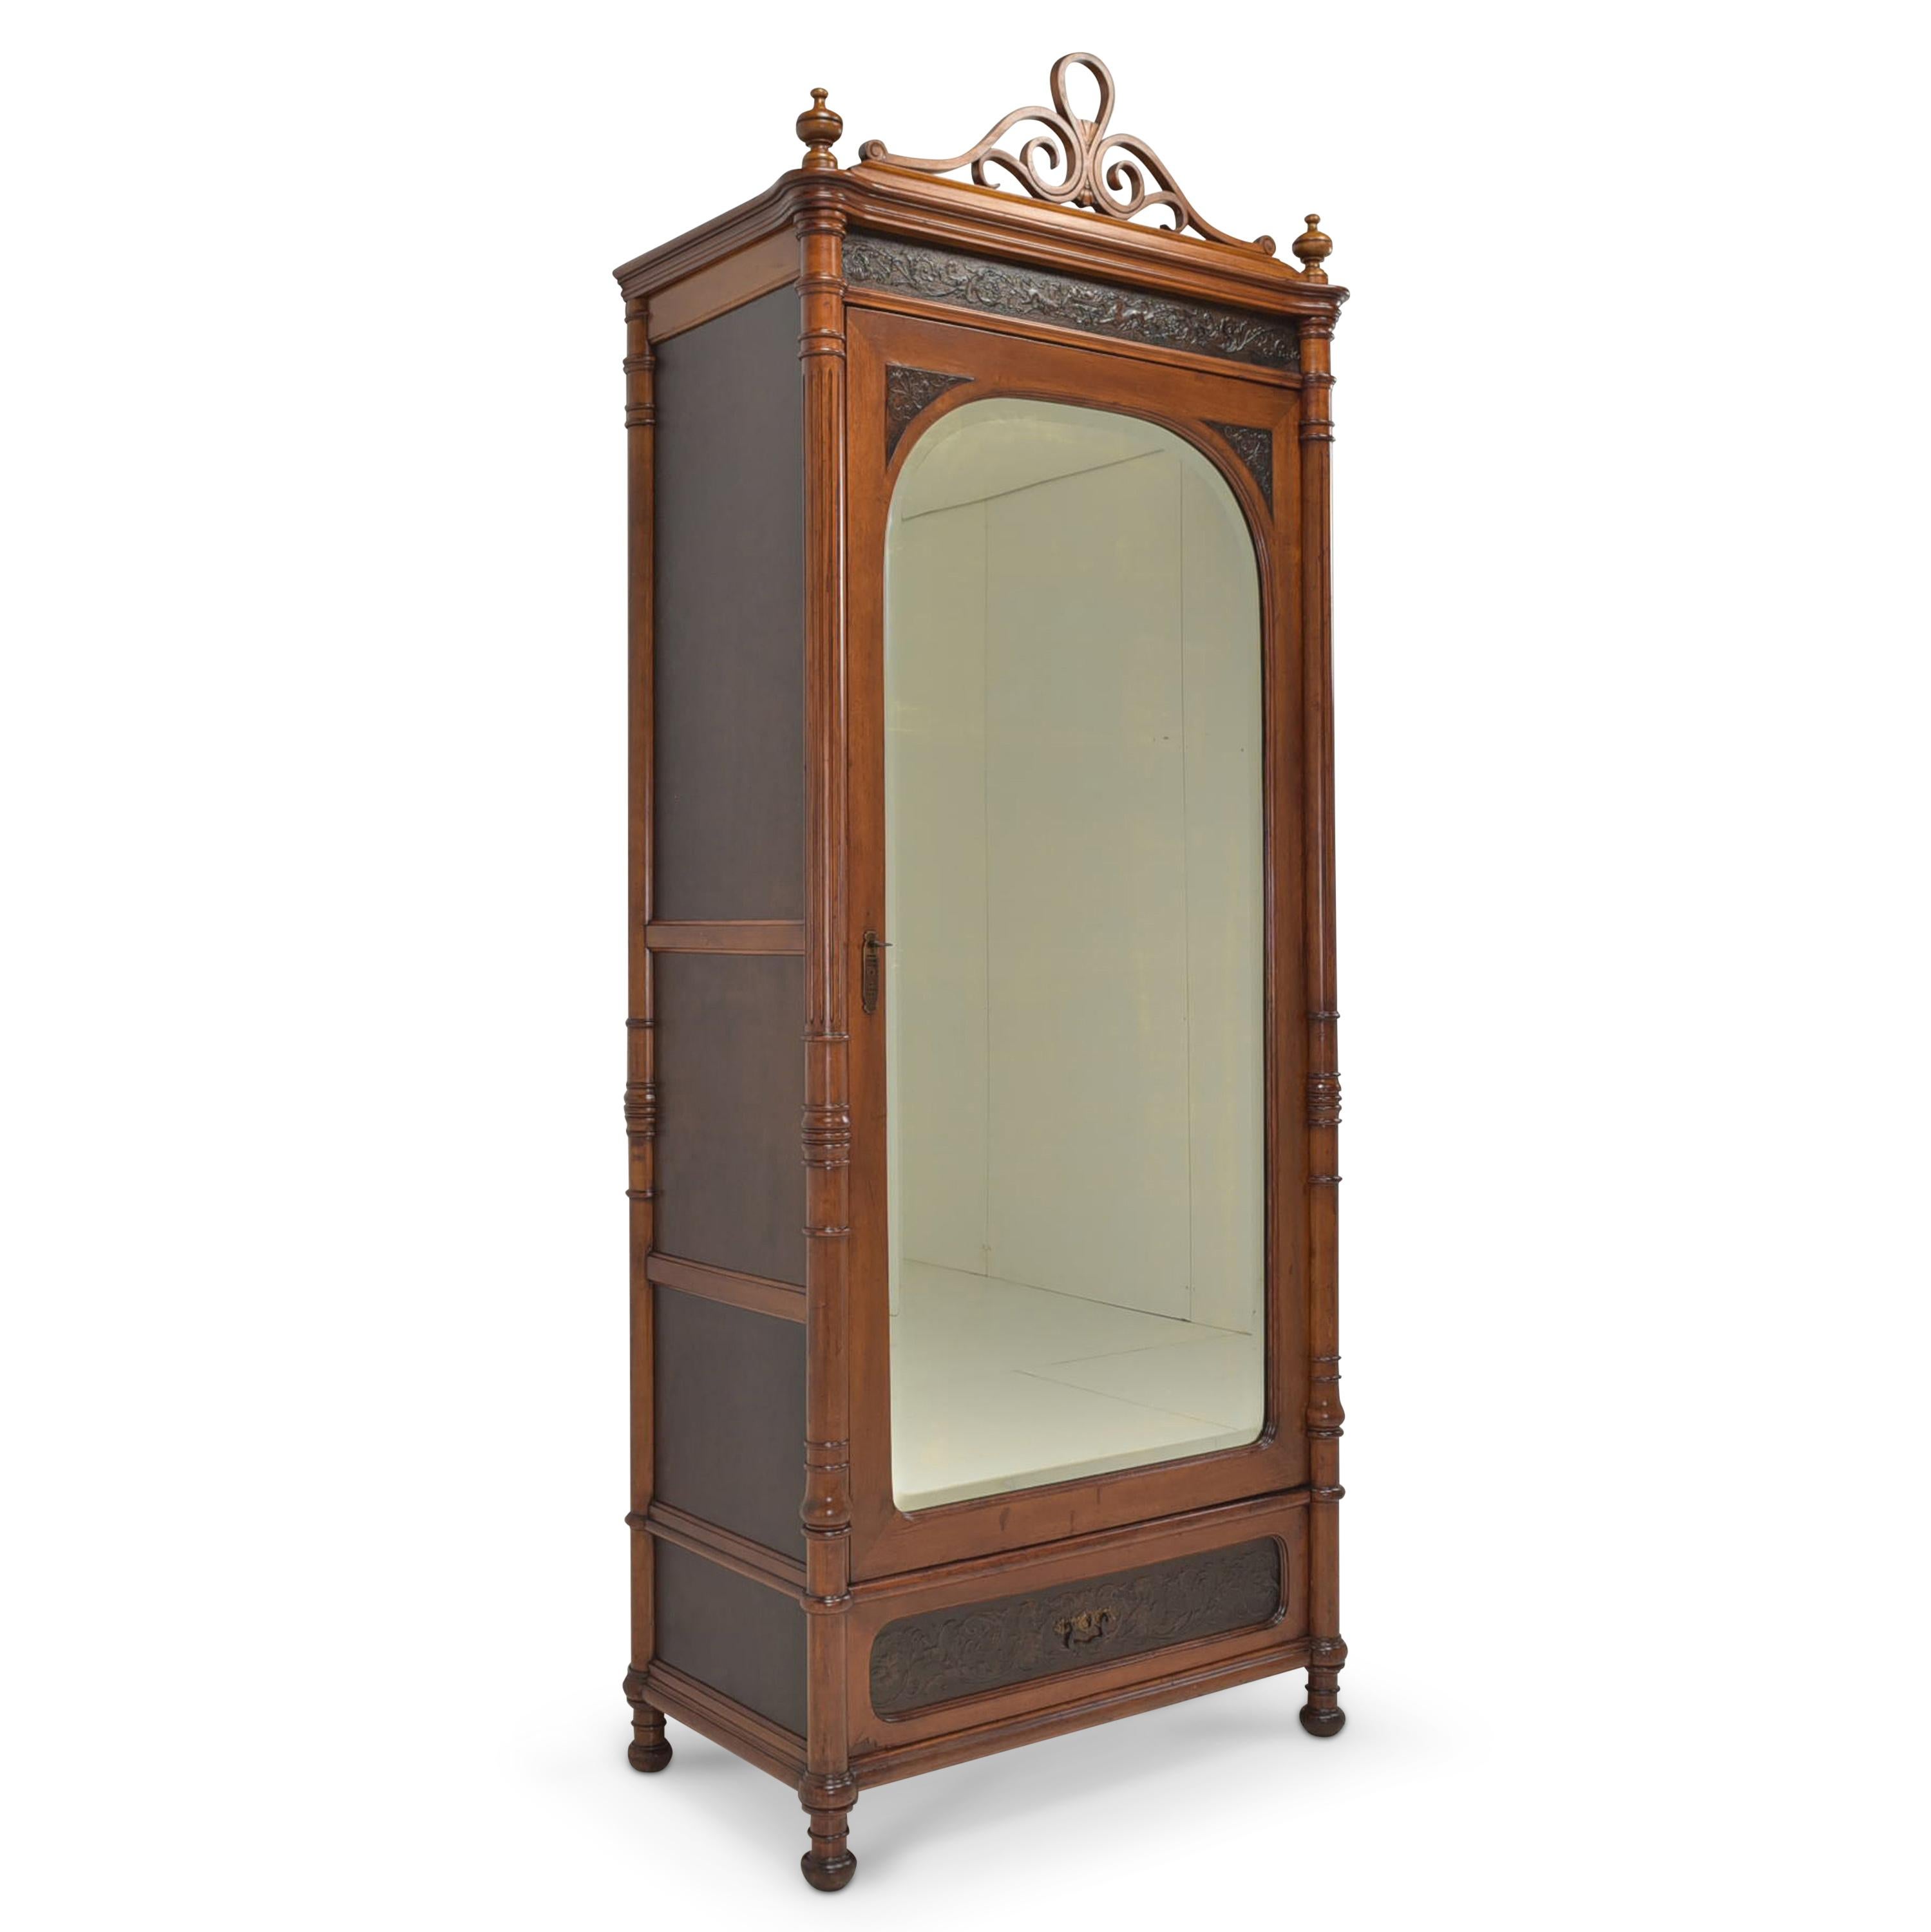 One-door wardrobe restored J & J Kohn bentwood floorboard, circa 1920

Features:
Single-door model with mirror, drawer, clothes rail and two shelves
High quality
Original faceted mirror
Fillings with embossed ornamentation / relief
Original